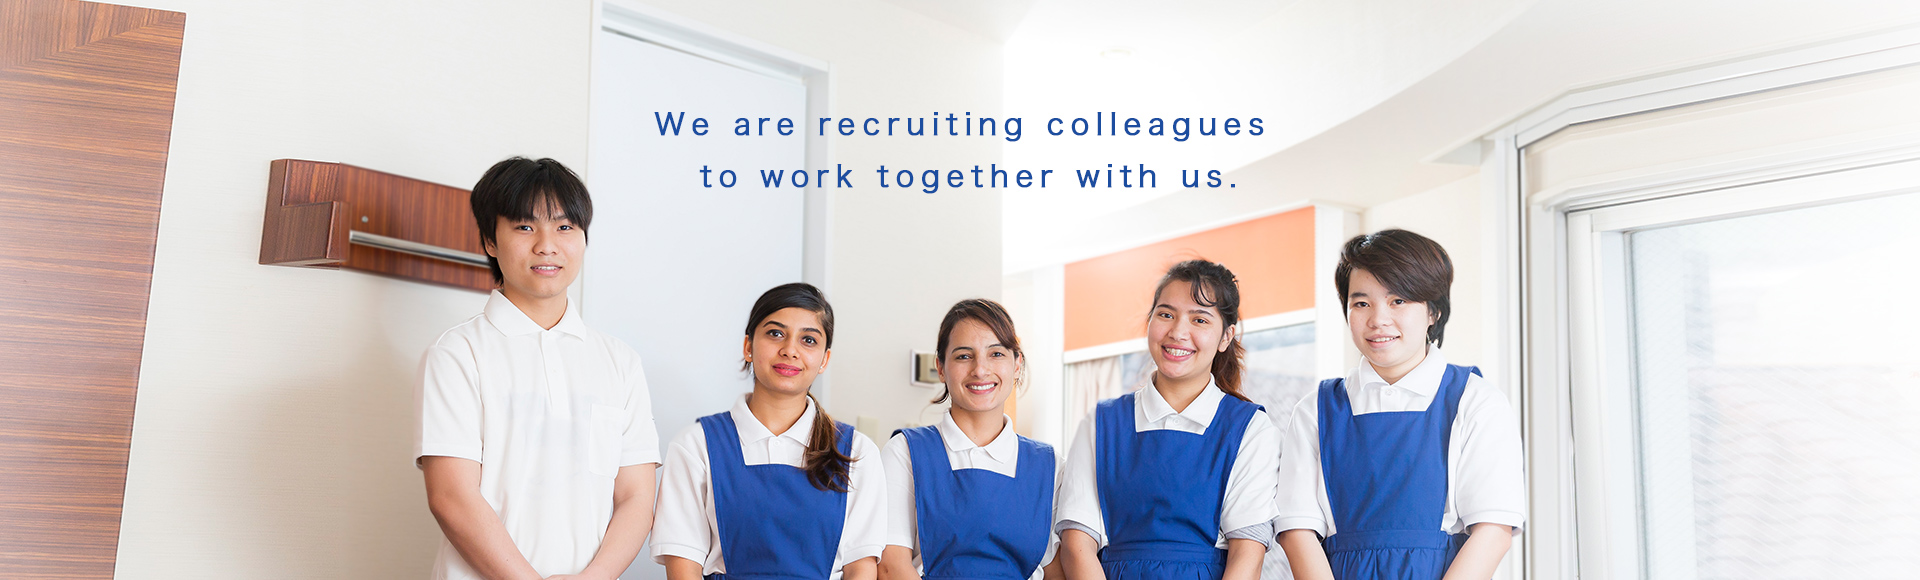 We are recruiting colleagues to work together with us.